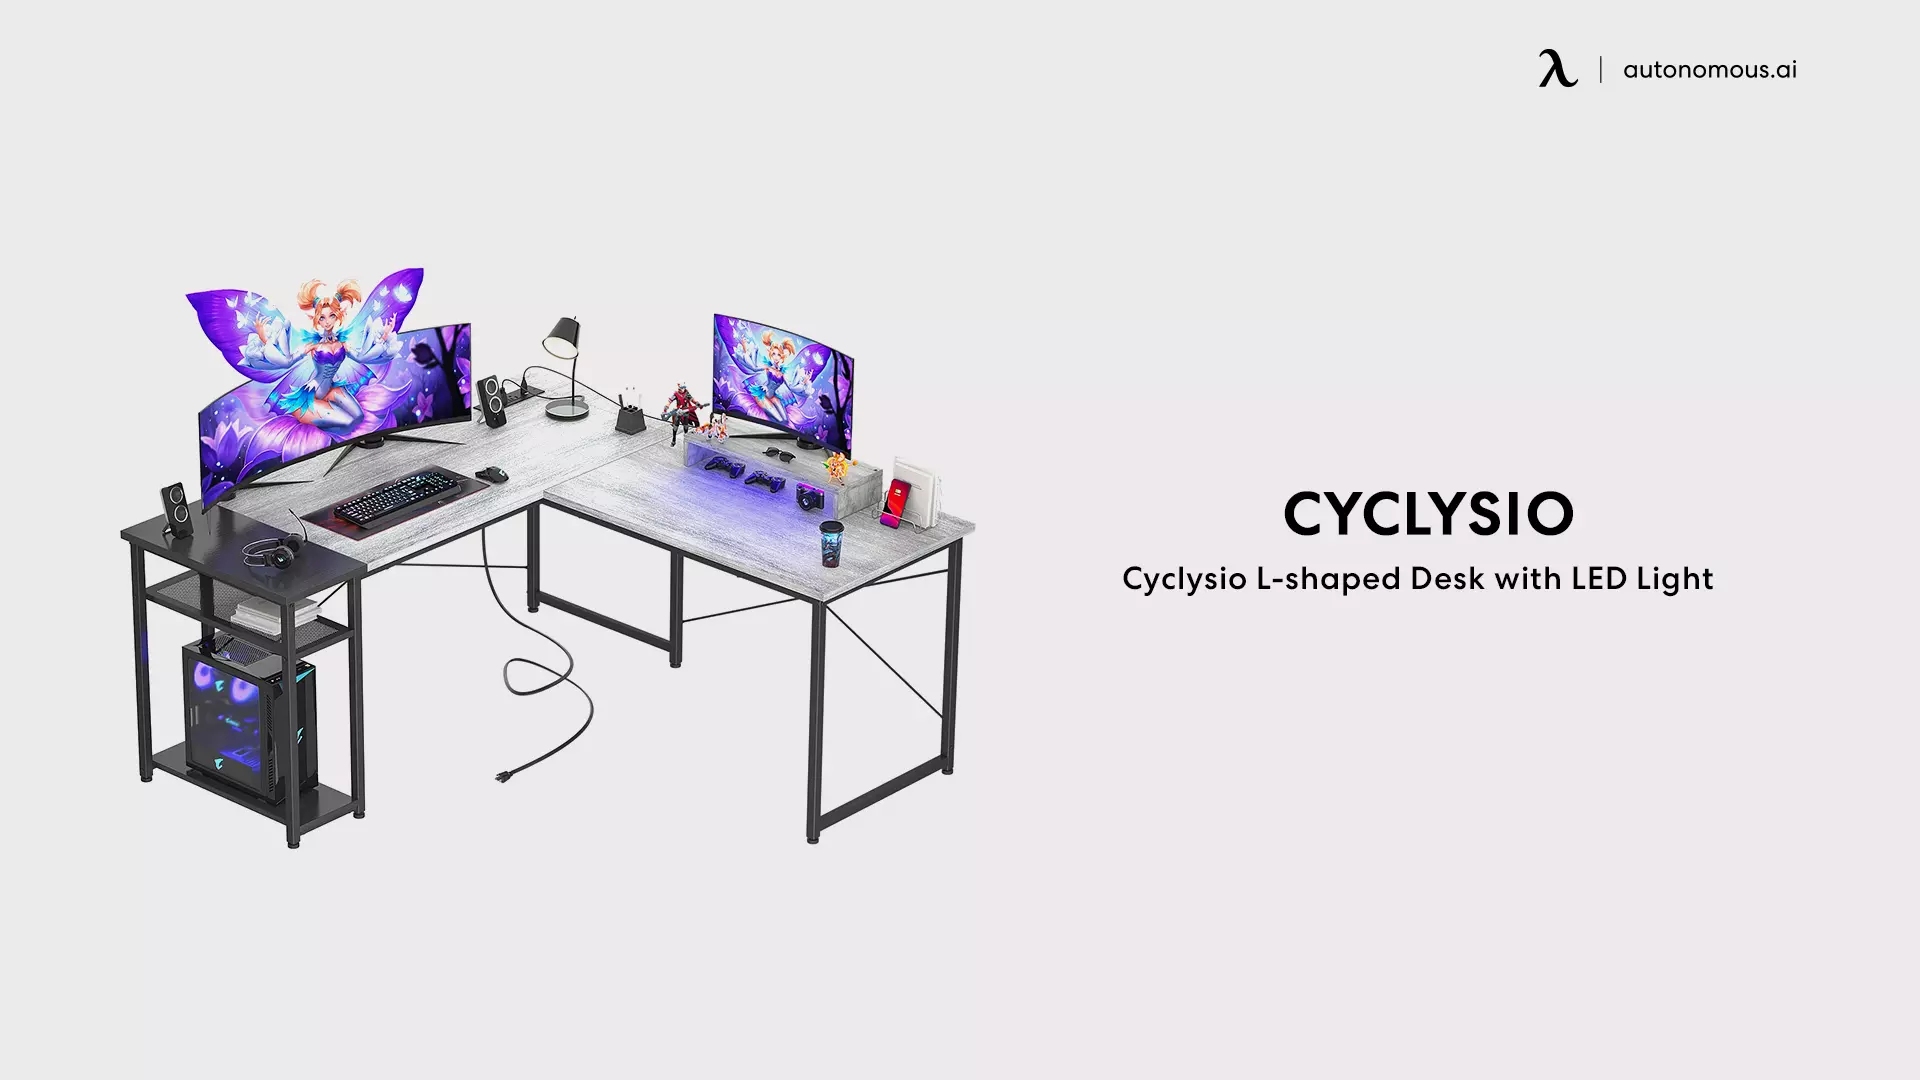 Cyclysio L-shaped Desk with LED Light